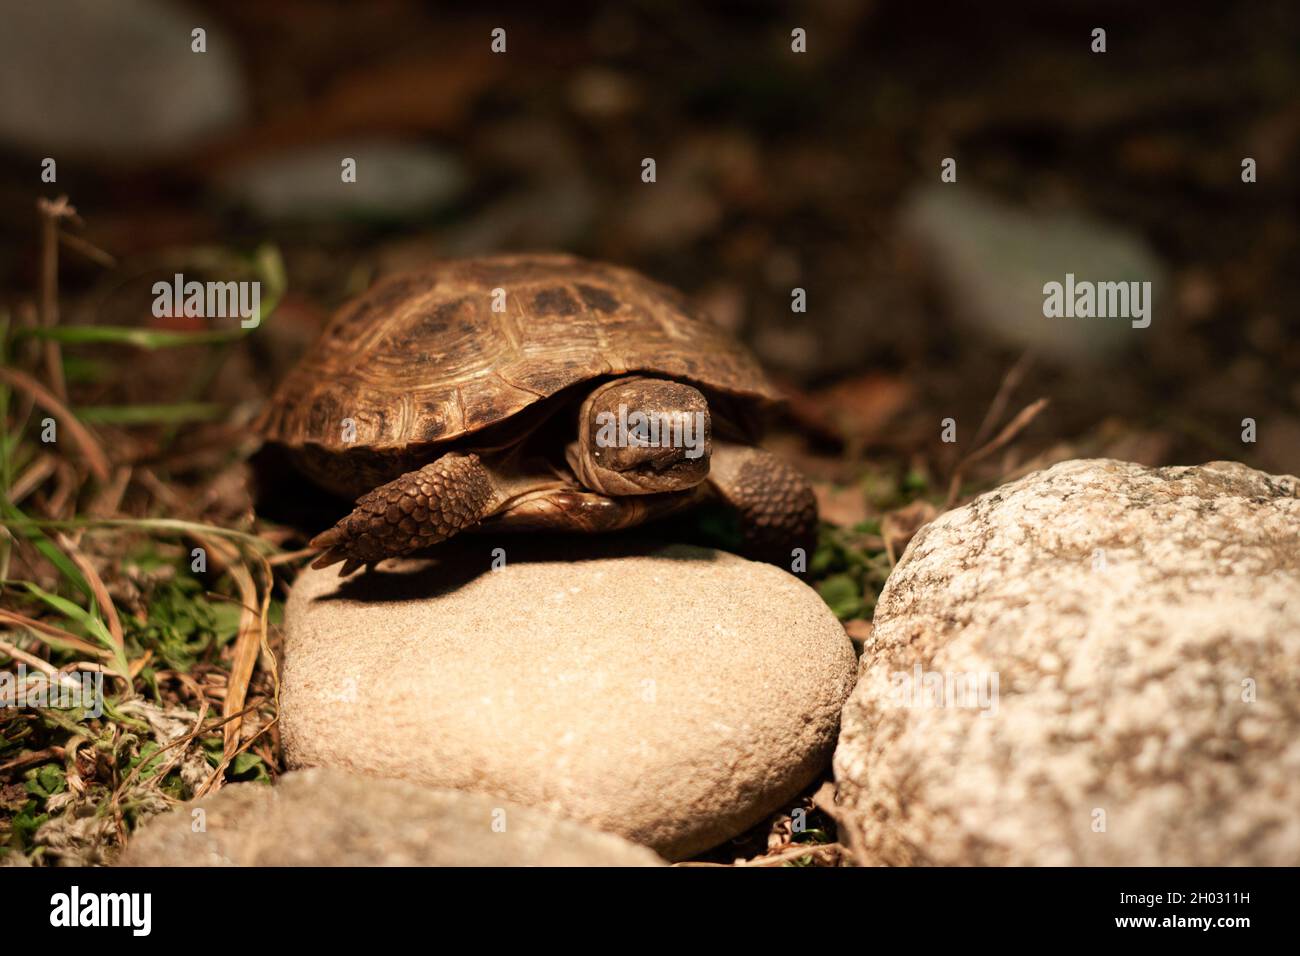 Baby Russian tortoise in a terrarium with rocks and grass | Baby steppe tortoise basking on a rock under the light bulb front view photo Stock Photo